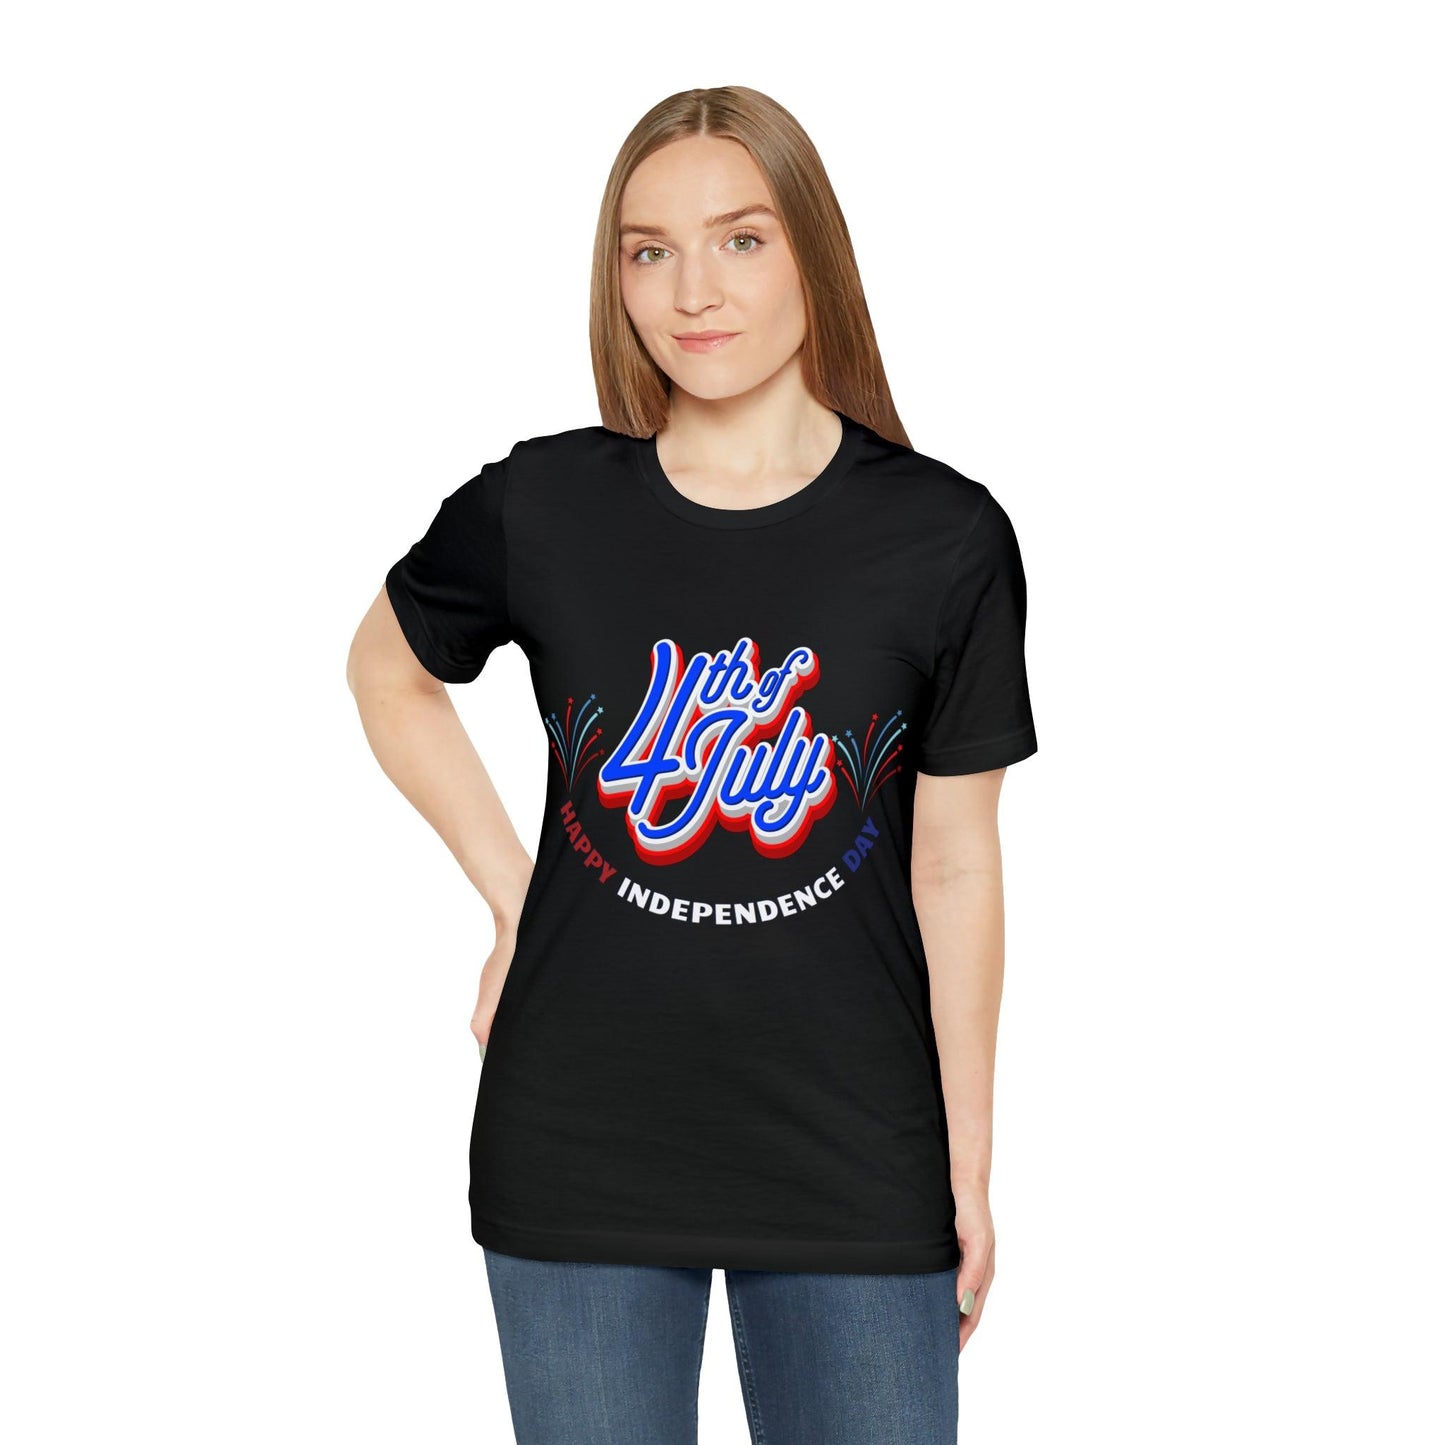 Celebrate Freedom with Patriotic Shirts: Happy Independence Day Shirt for Women and Men, USA Flag, Fireworks, and Freedom-inspired Designs